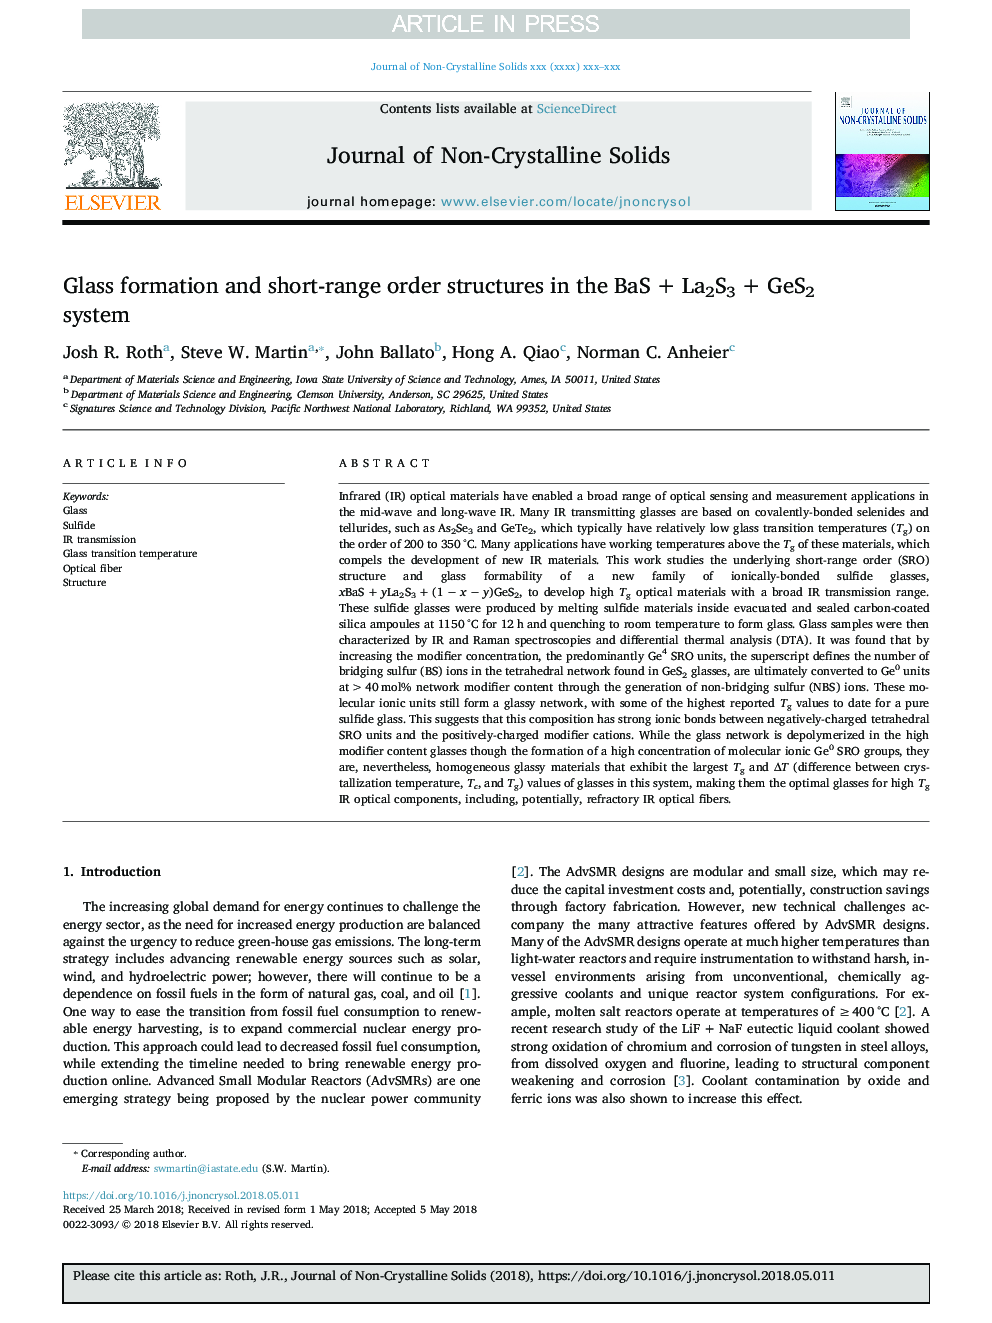 Glass formation and short-range order structures in the BaSâ¯+â¯La2S3â¯+â¯GeS2 system